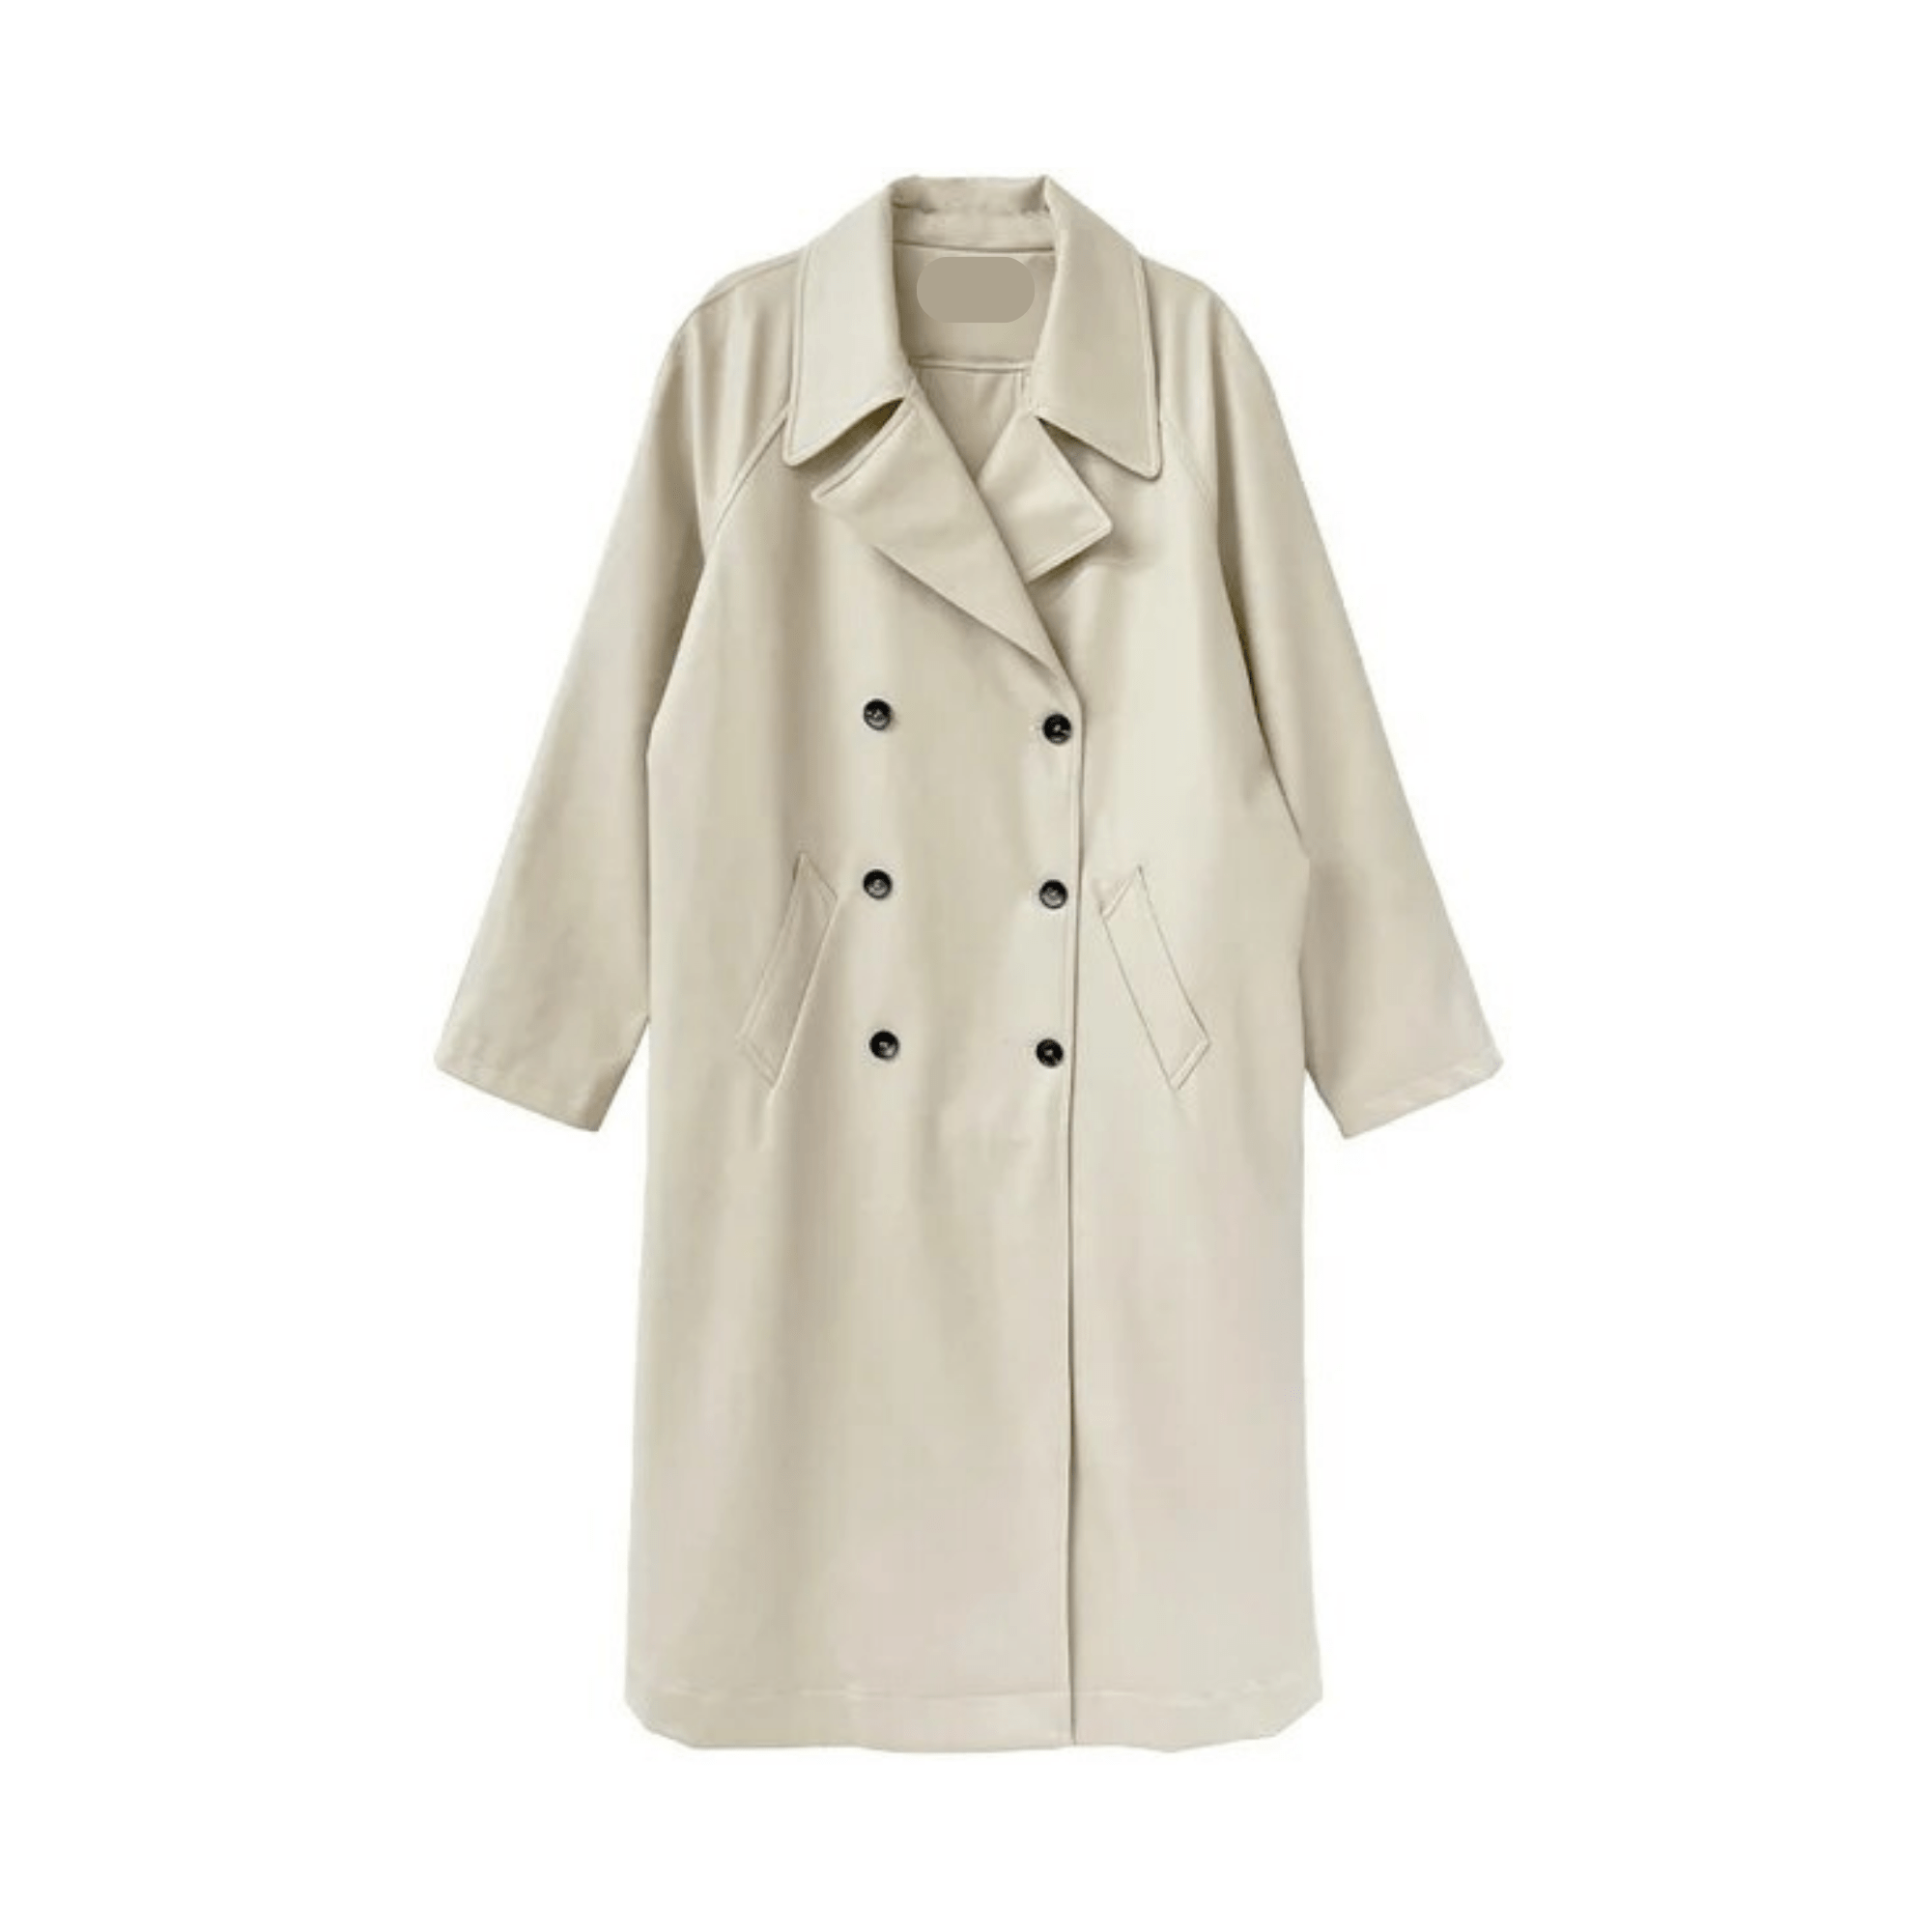 Vegan Leather Double-Breasted Trench Coat - Kelly Obi New York